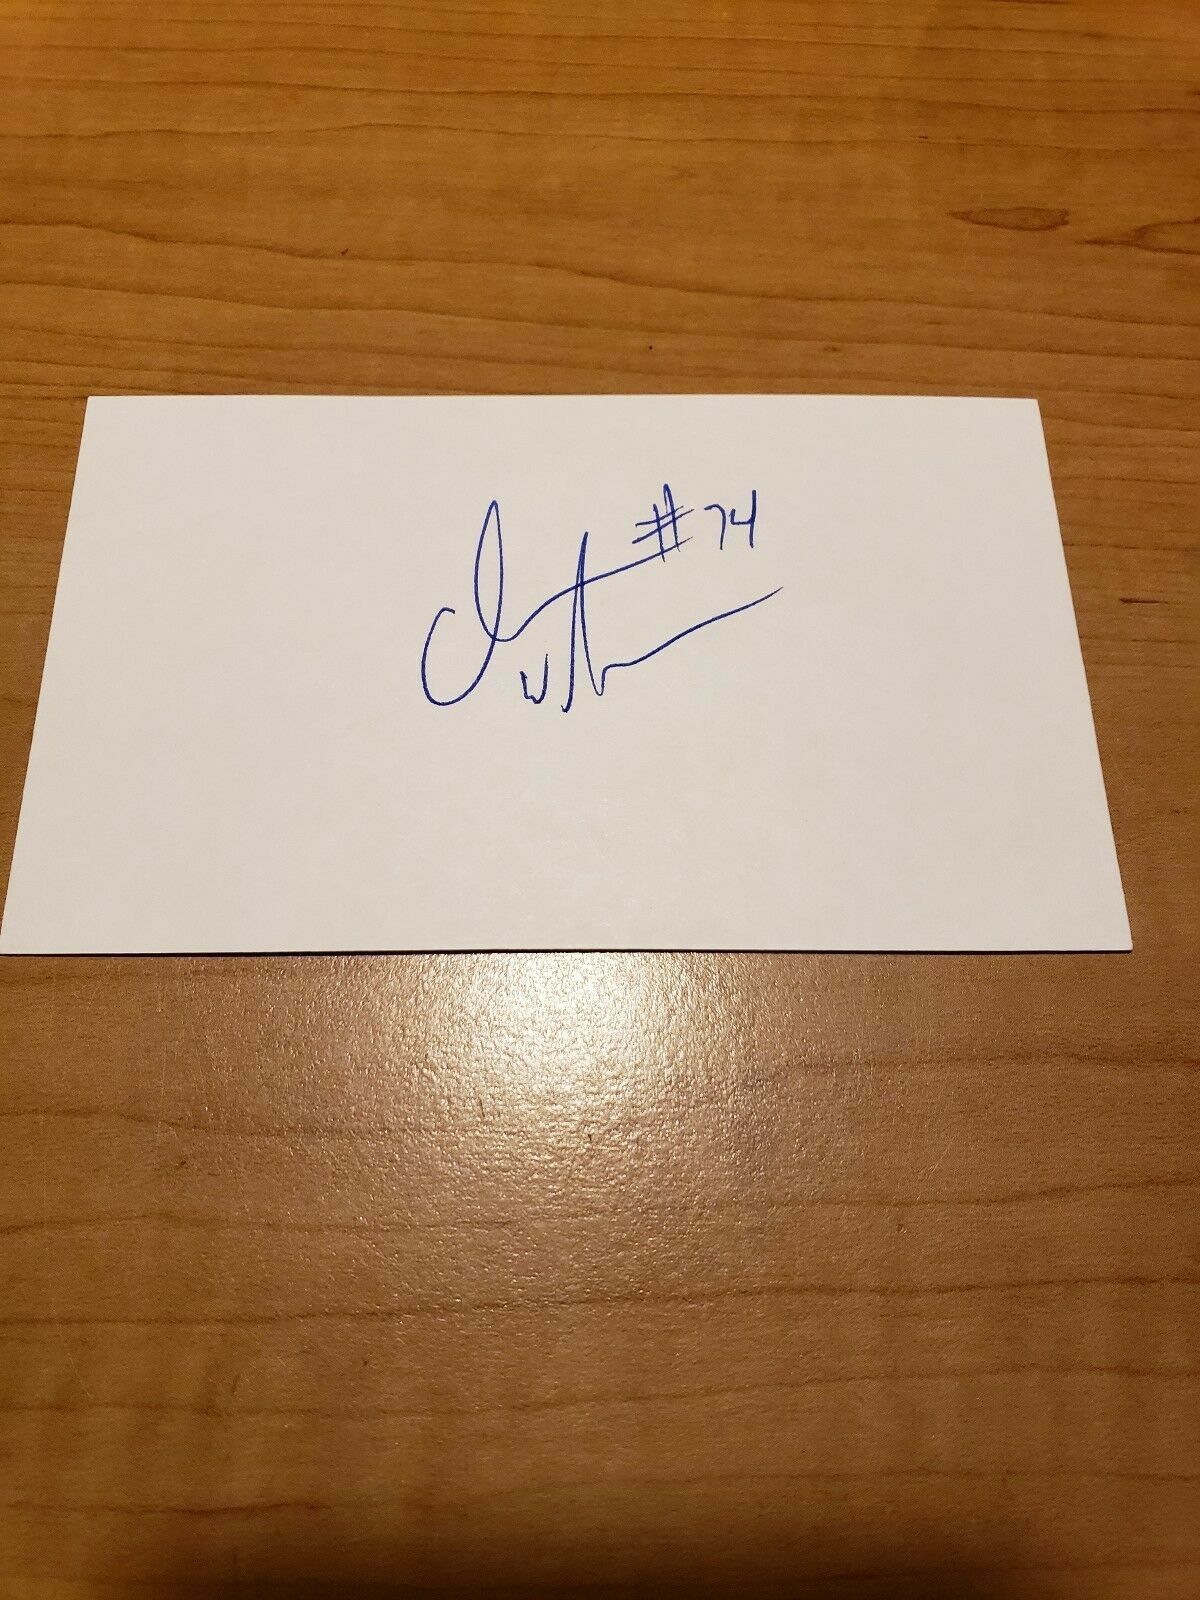 CHRIS WHEELER - FOOTBALL - AUTOGRAPH SIGNED - INDEX CARD - AUTHENTIC- A6276